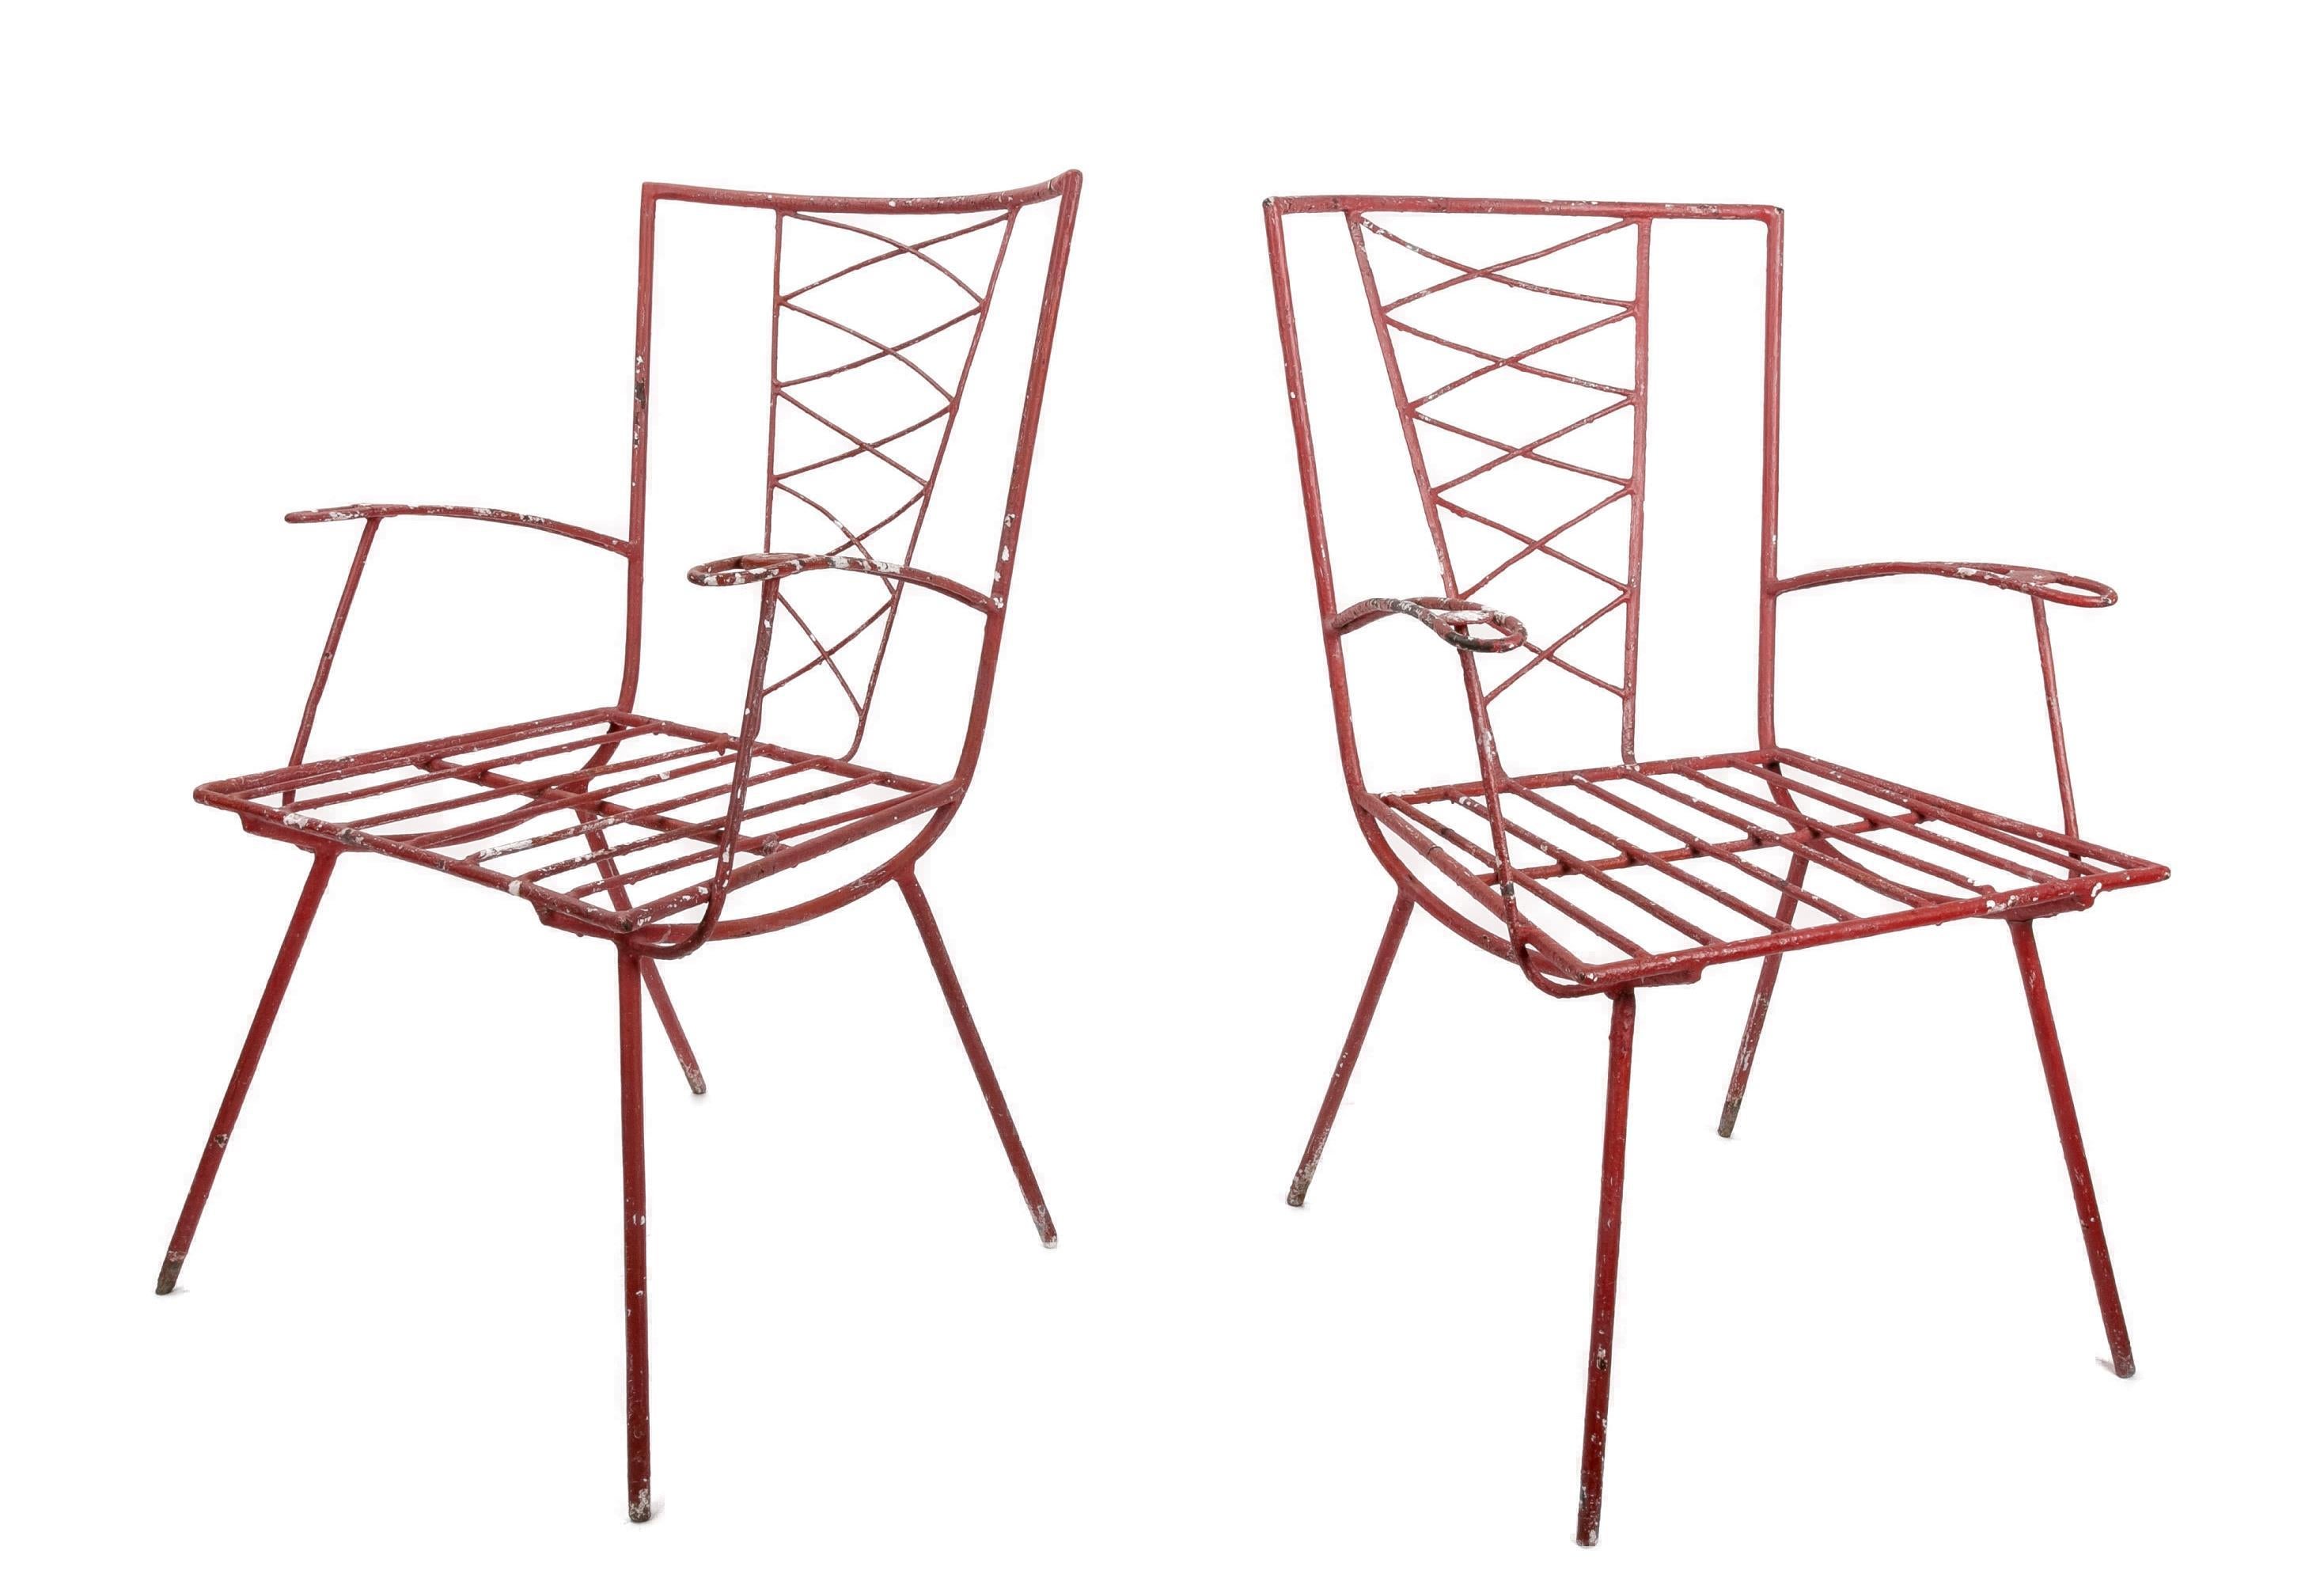 1970s Spanish pair of red painted iron chairs.